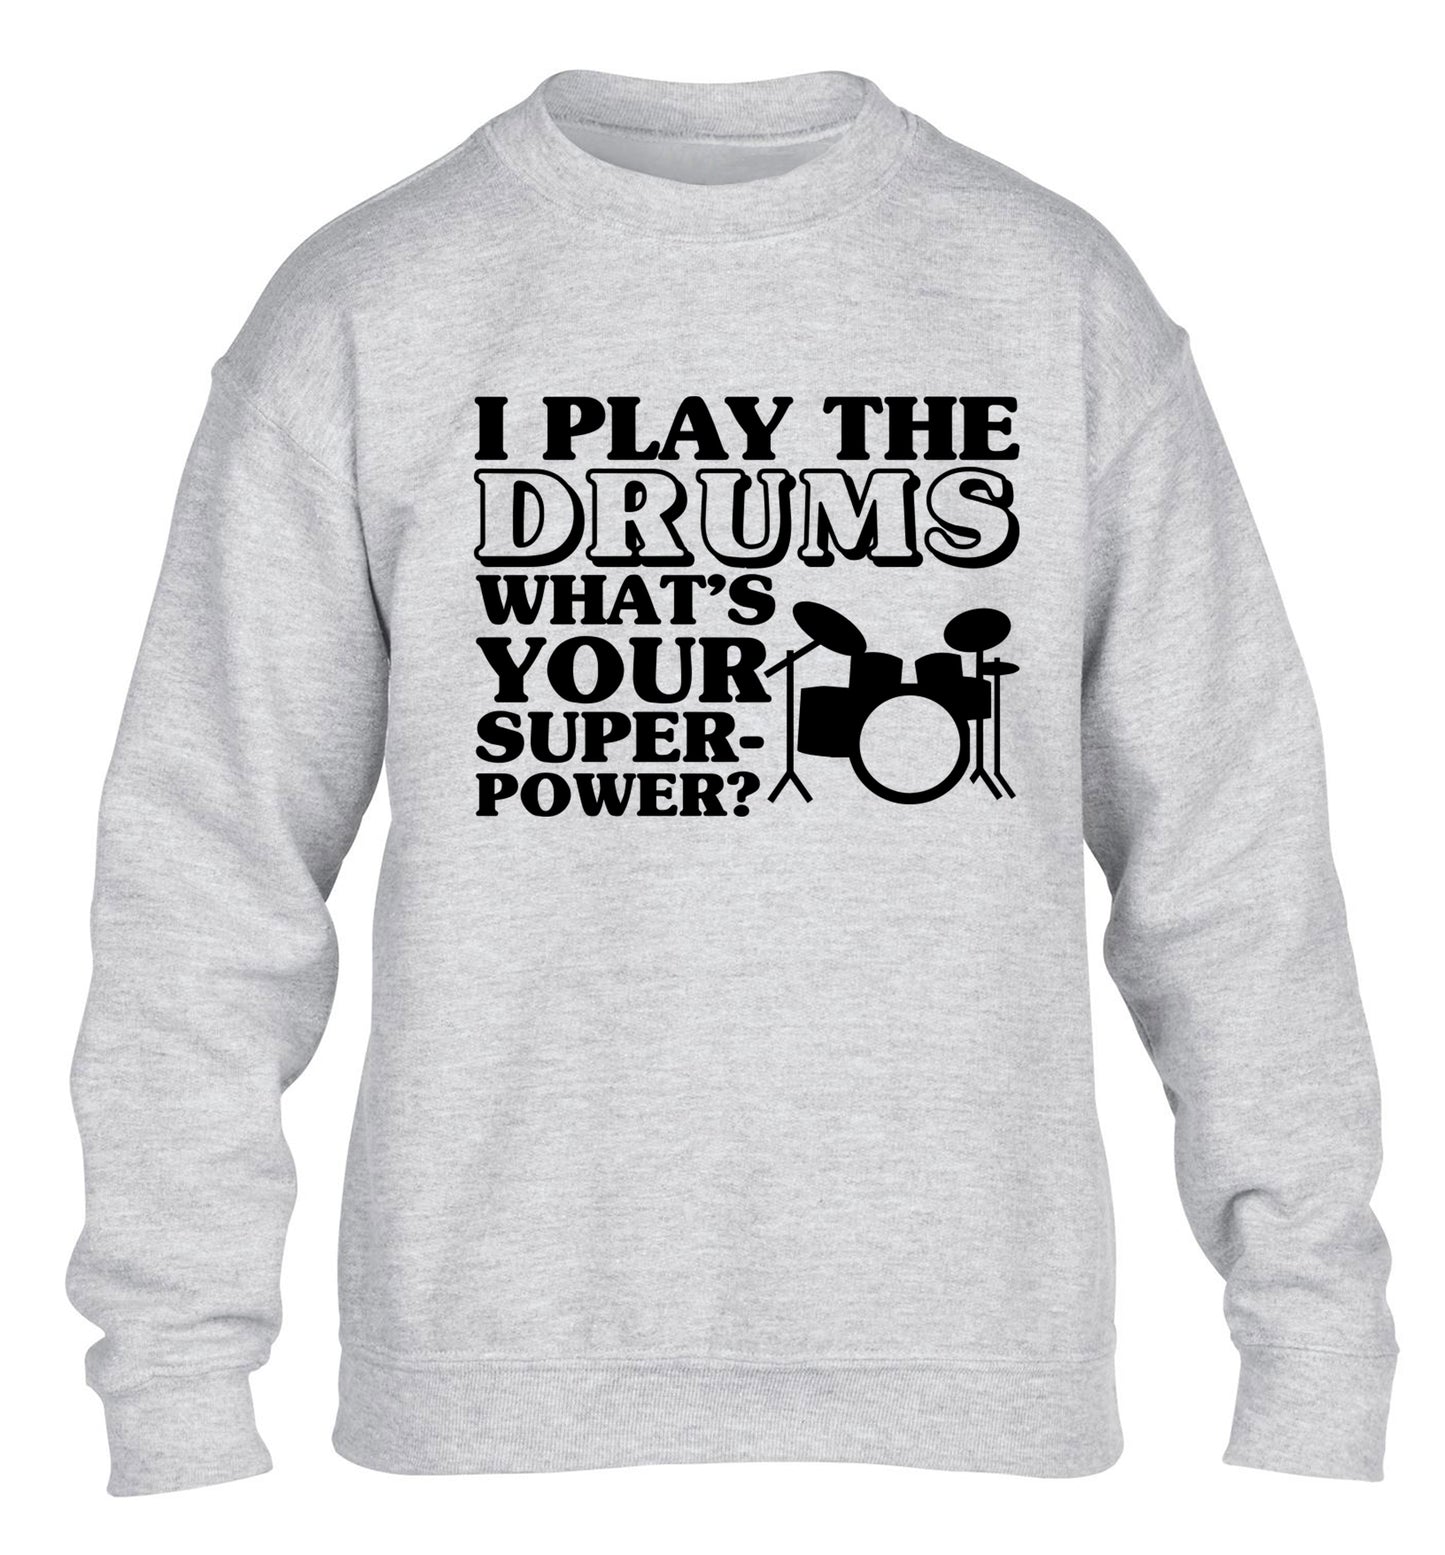 I play the drums what's your superpower? children's grey sweater 12-14 Years